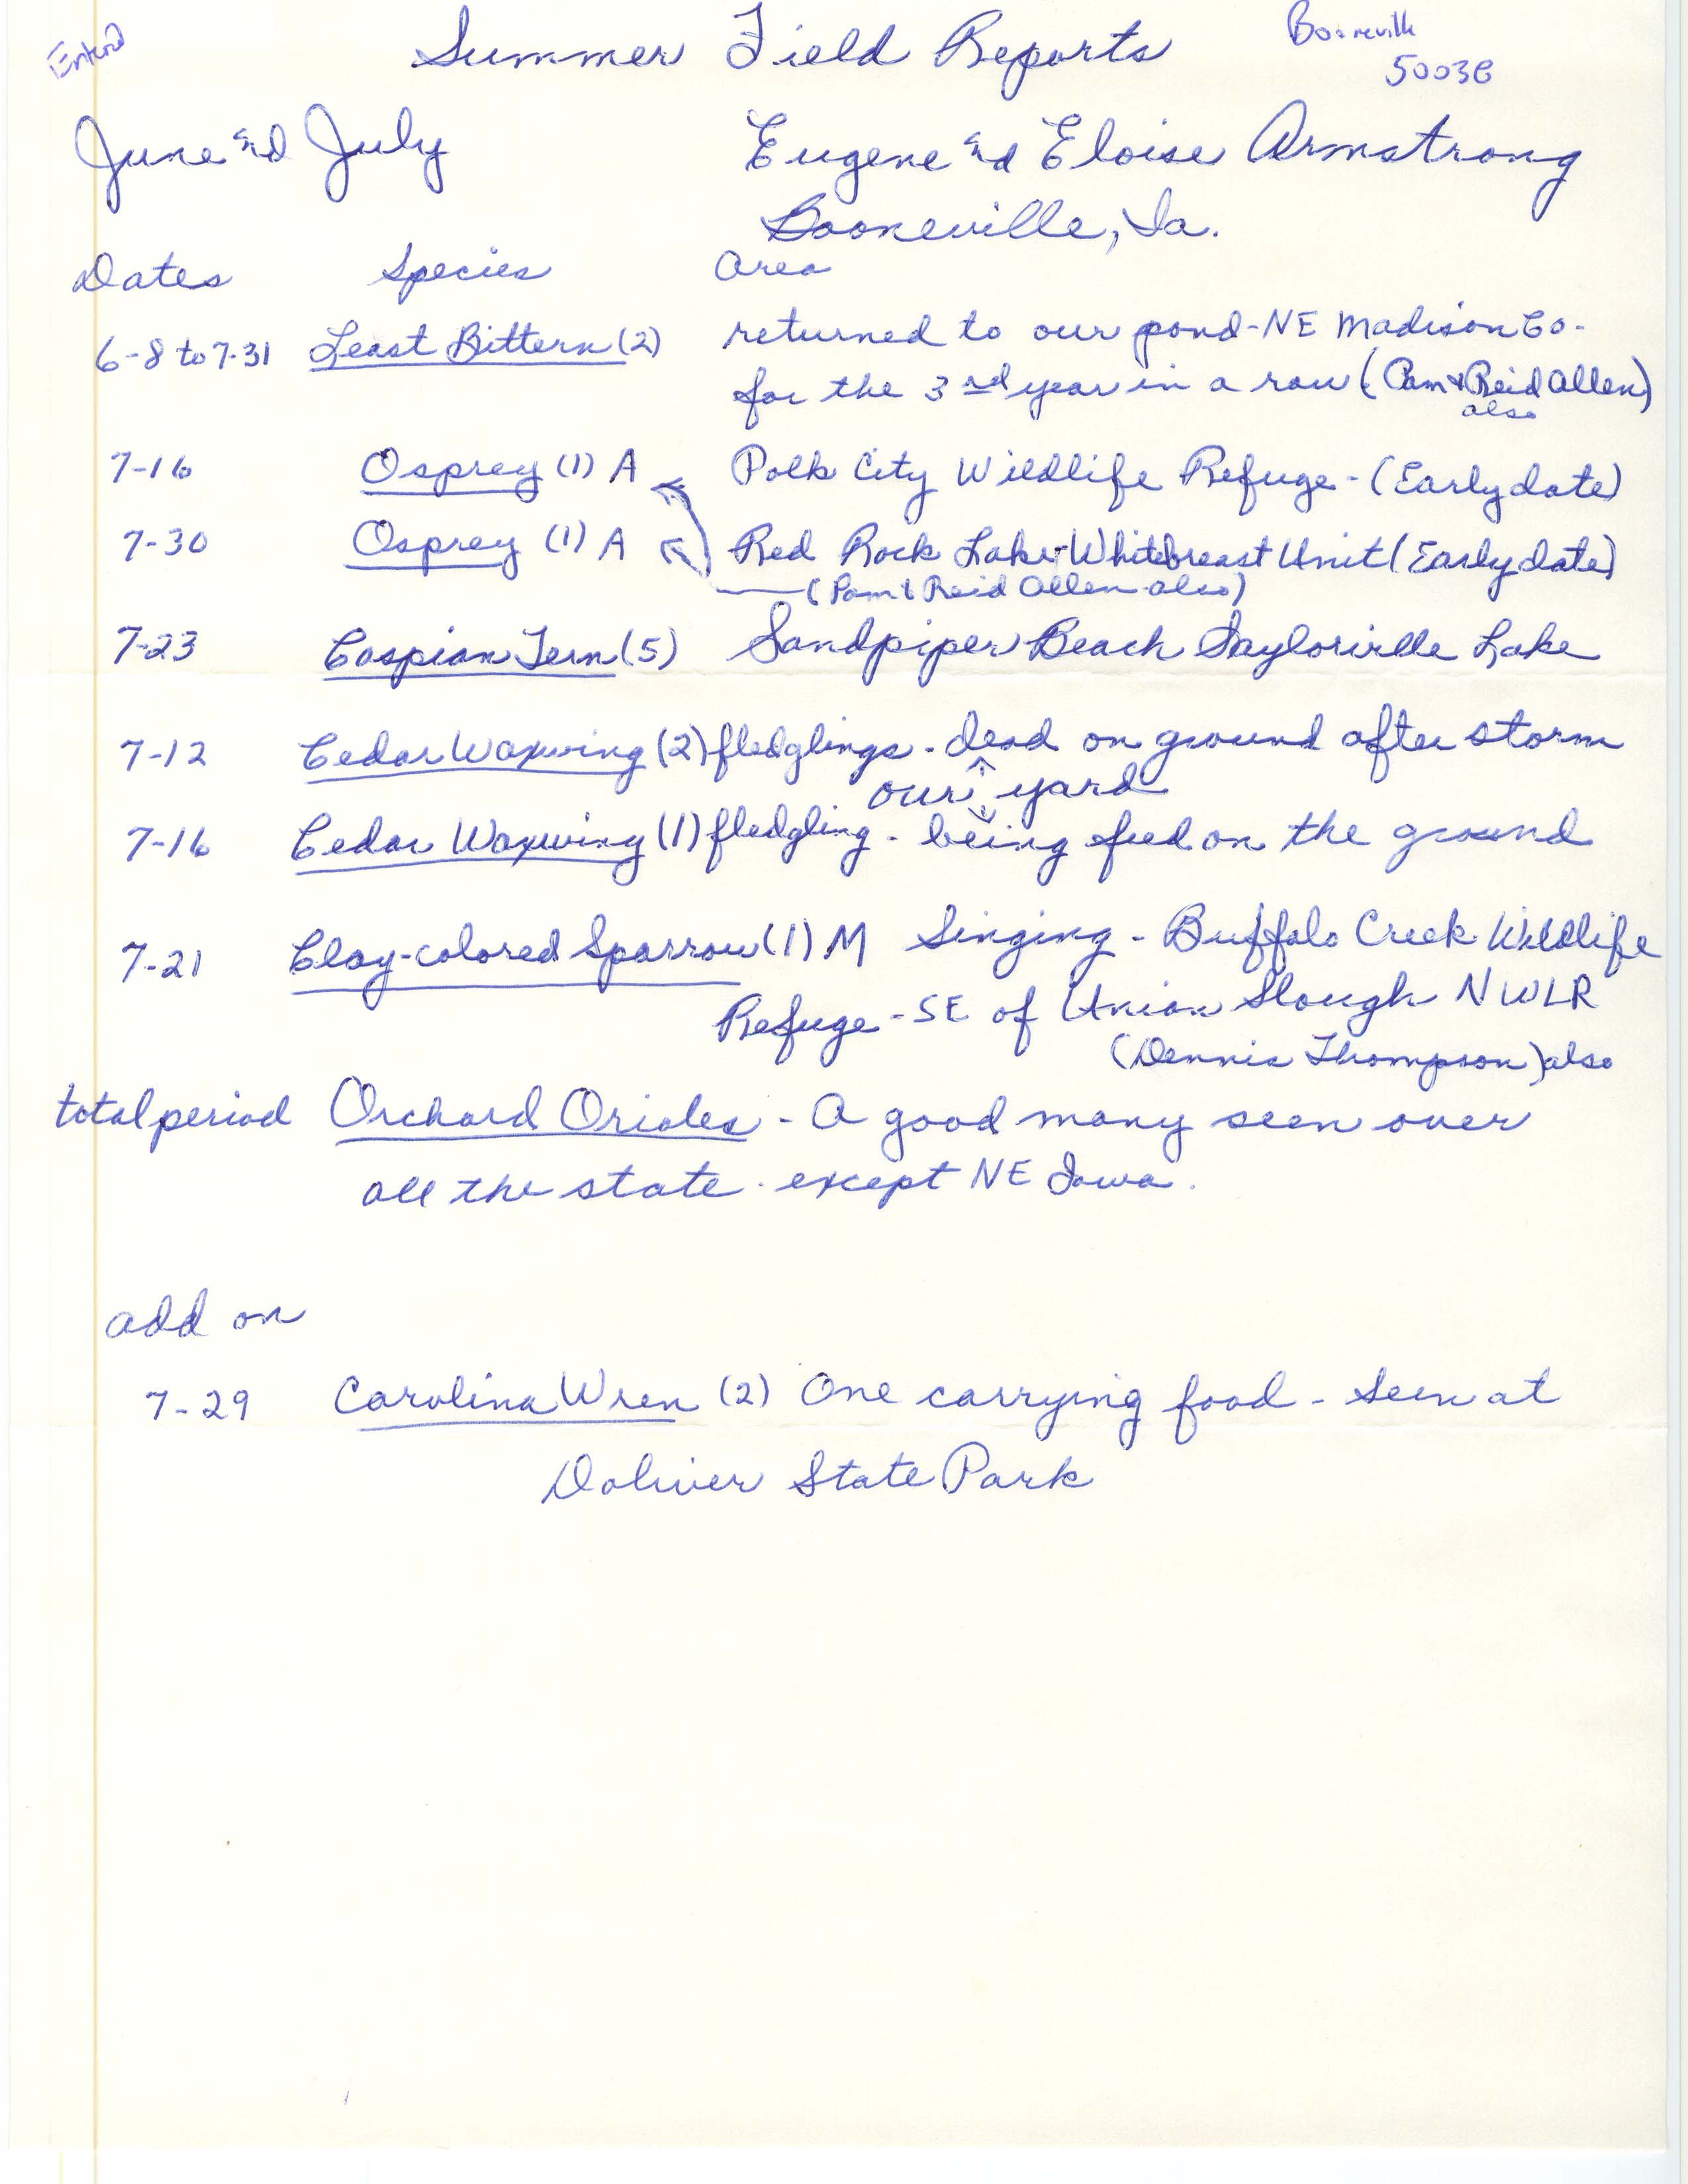 Field notes contributed by Eugene Armstrong and Eloise Armstrong, summer 1989